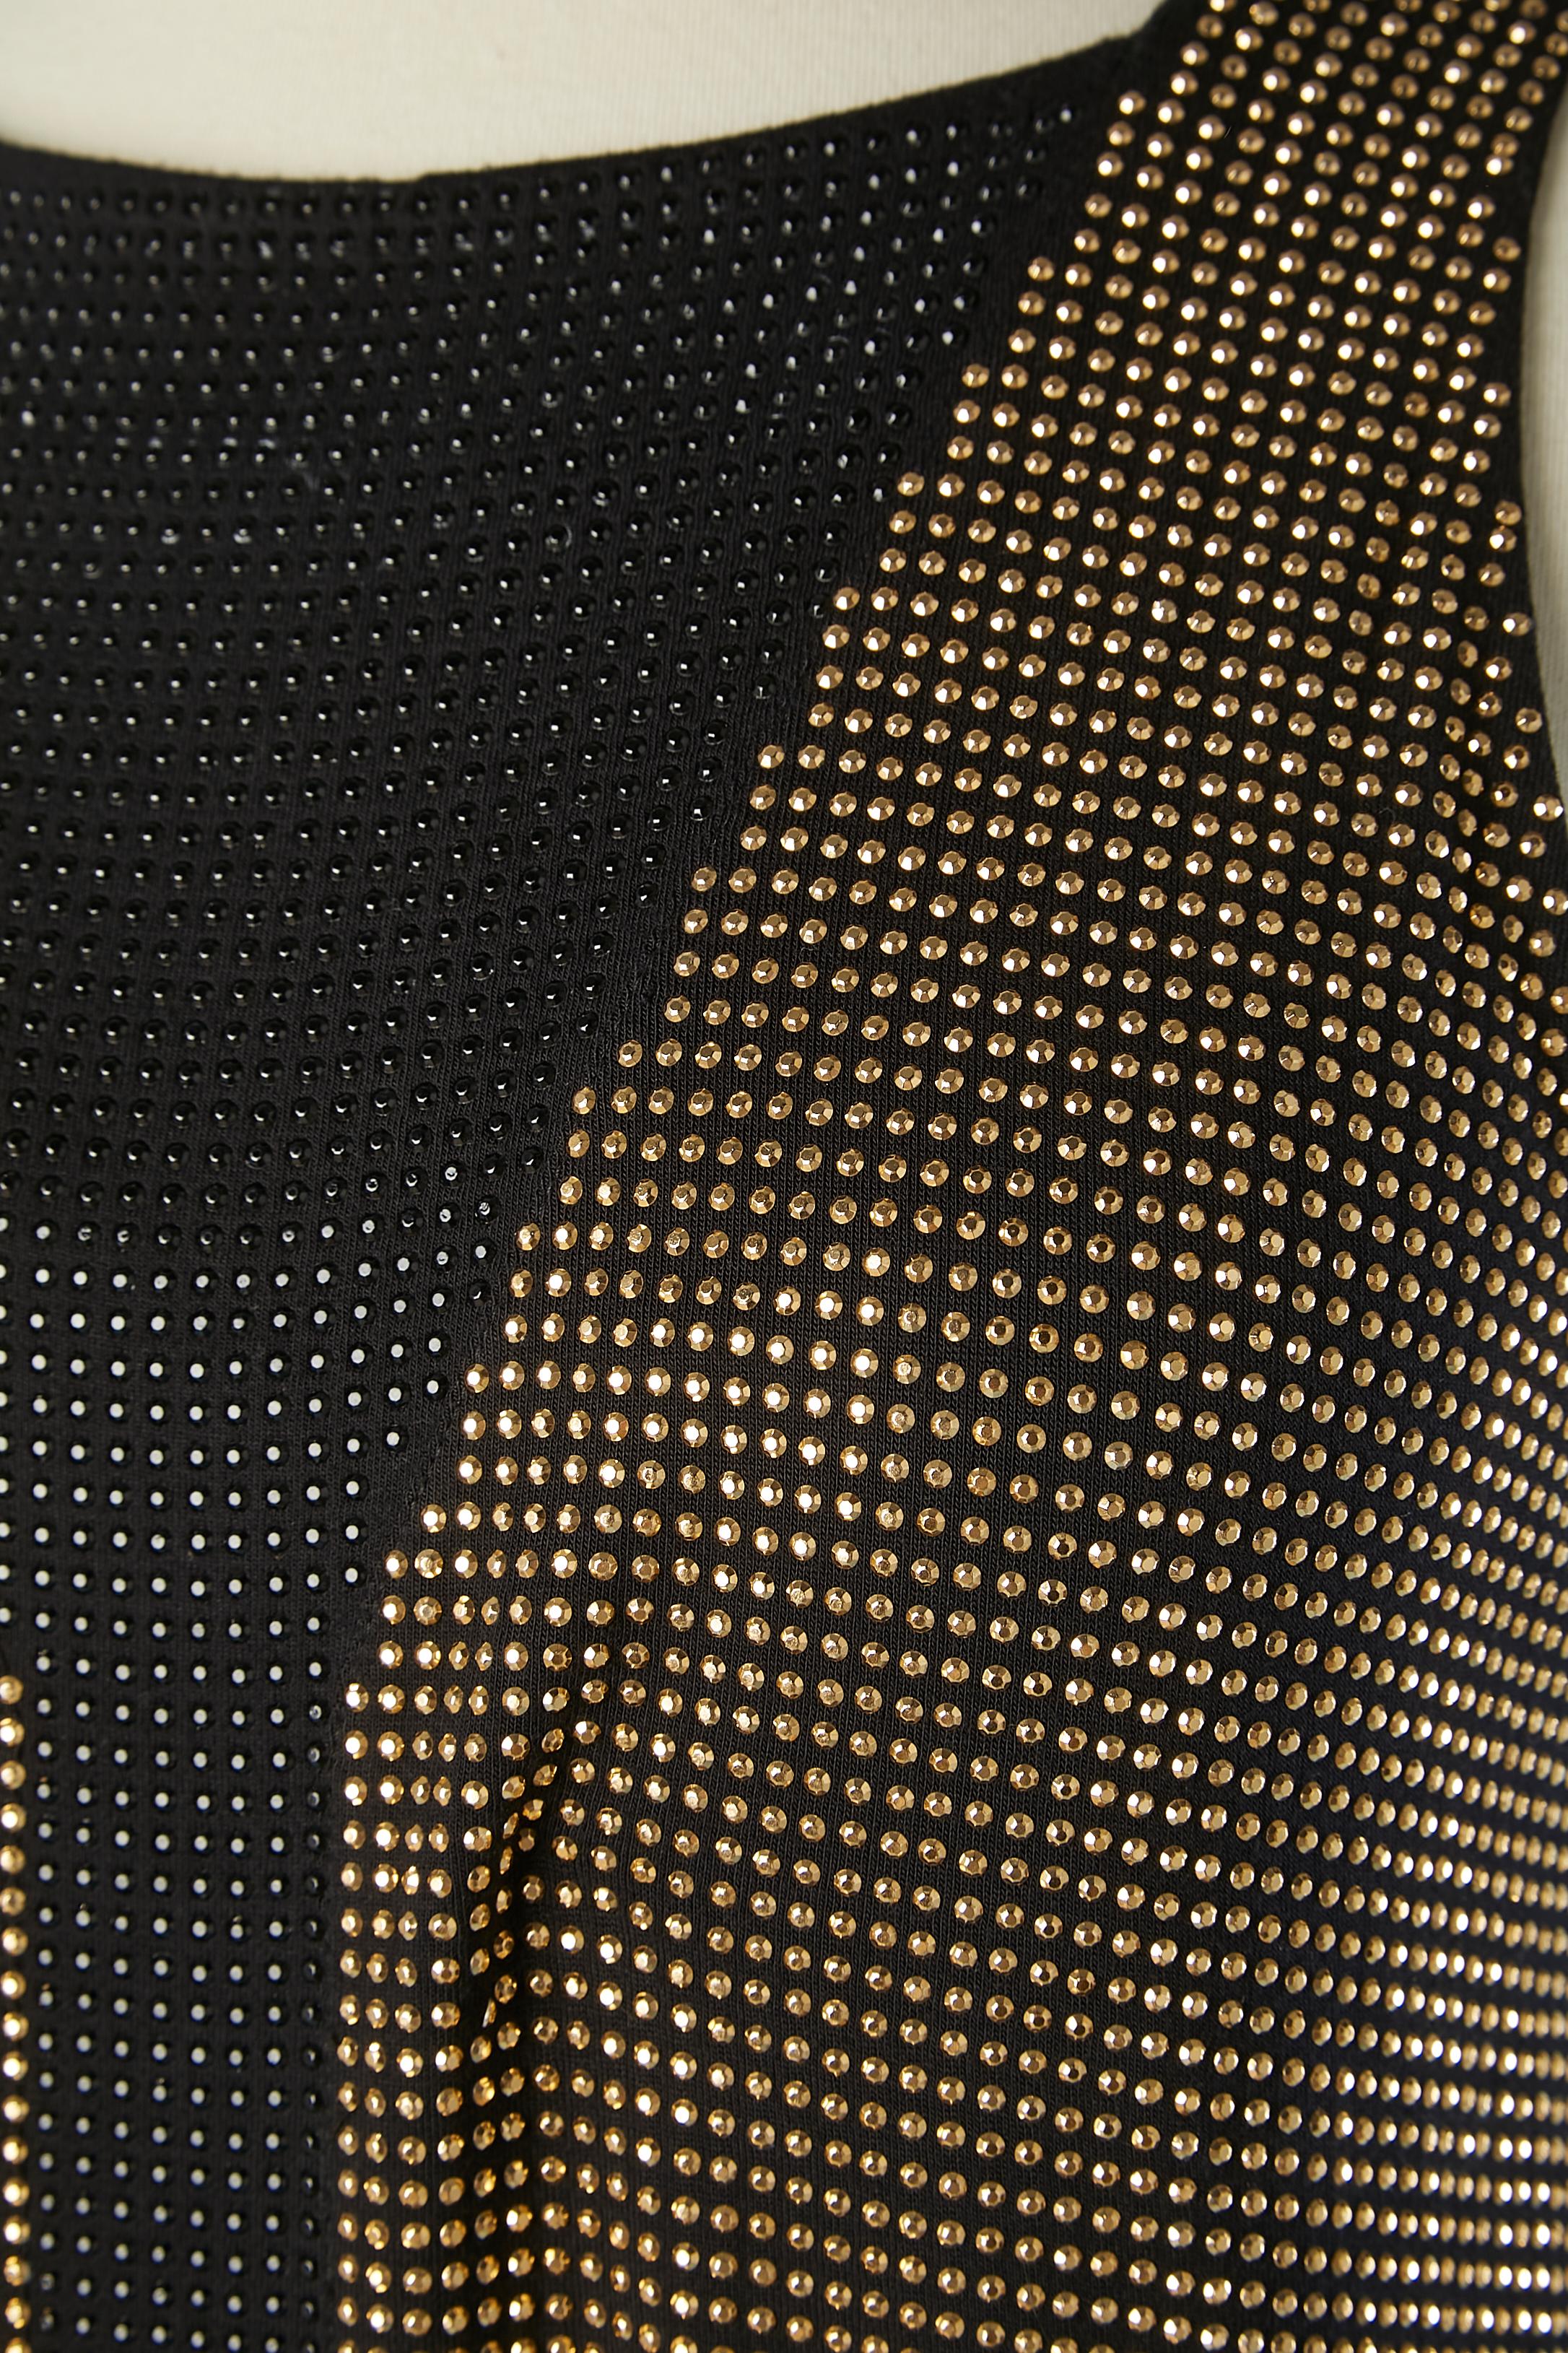 Sleeveless jersey cocktail dress covered with gold and black studs.
Jersey composition: 92% rayon, 8% elastane.
Metal studs. 
SIZE 42 (It) 38 (Fr) M 